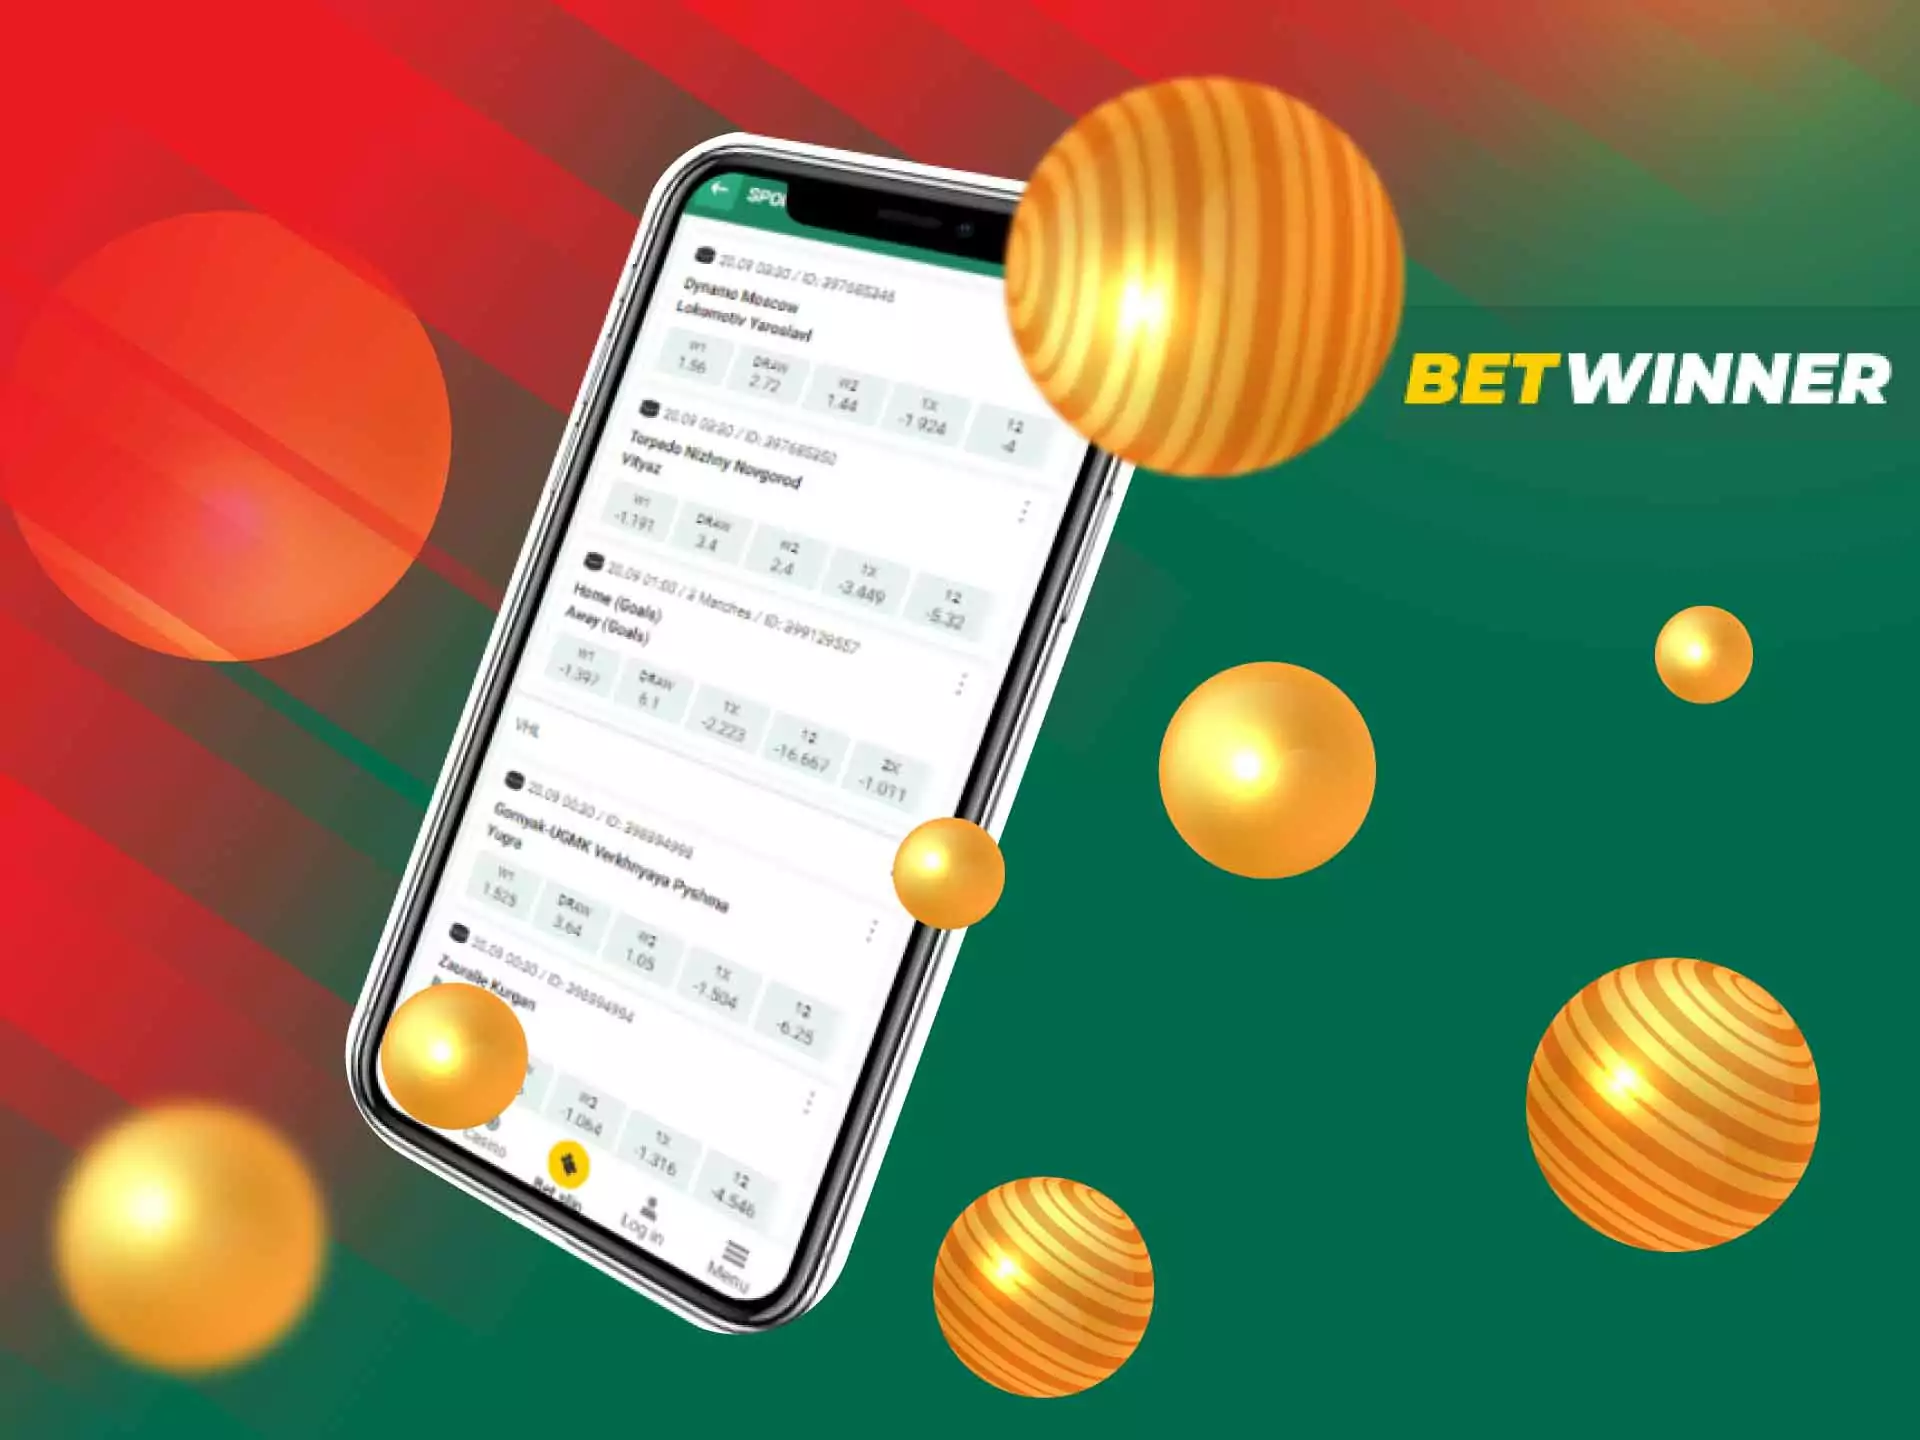 Single bets are the best for new players at Betwinner.